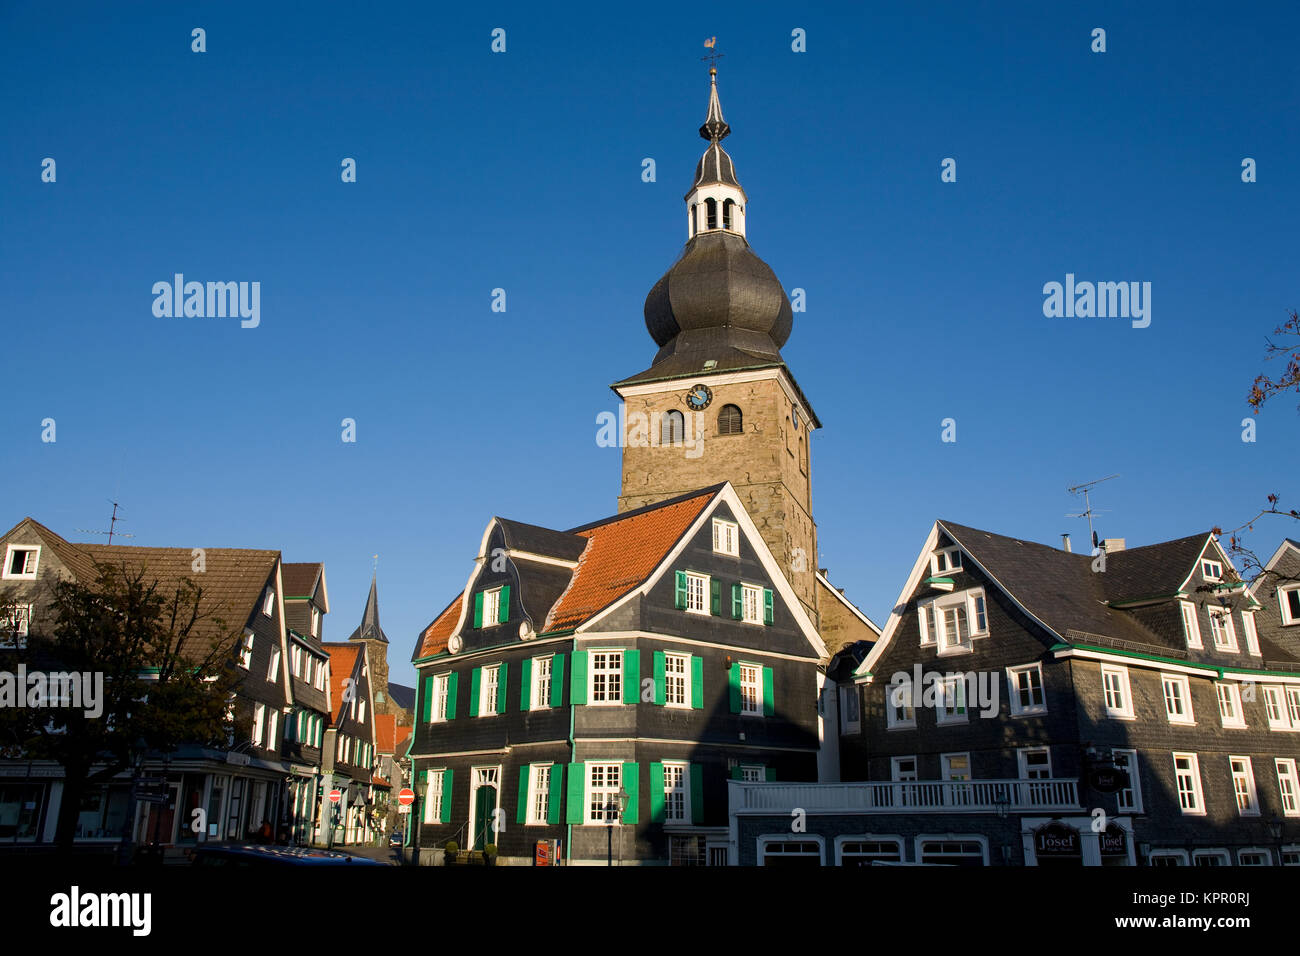 Europe, Germany, the Bergisches Land region, Remscheid-Lennep, houses at the old market, town church.  Europa, Deutschland, Bergisches Land, Remscheid Stock Photo